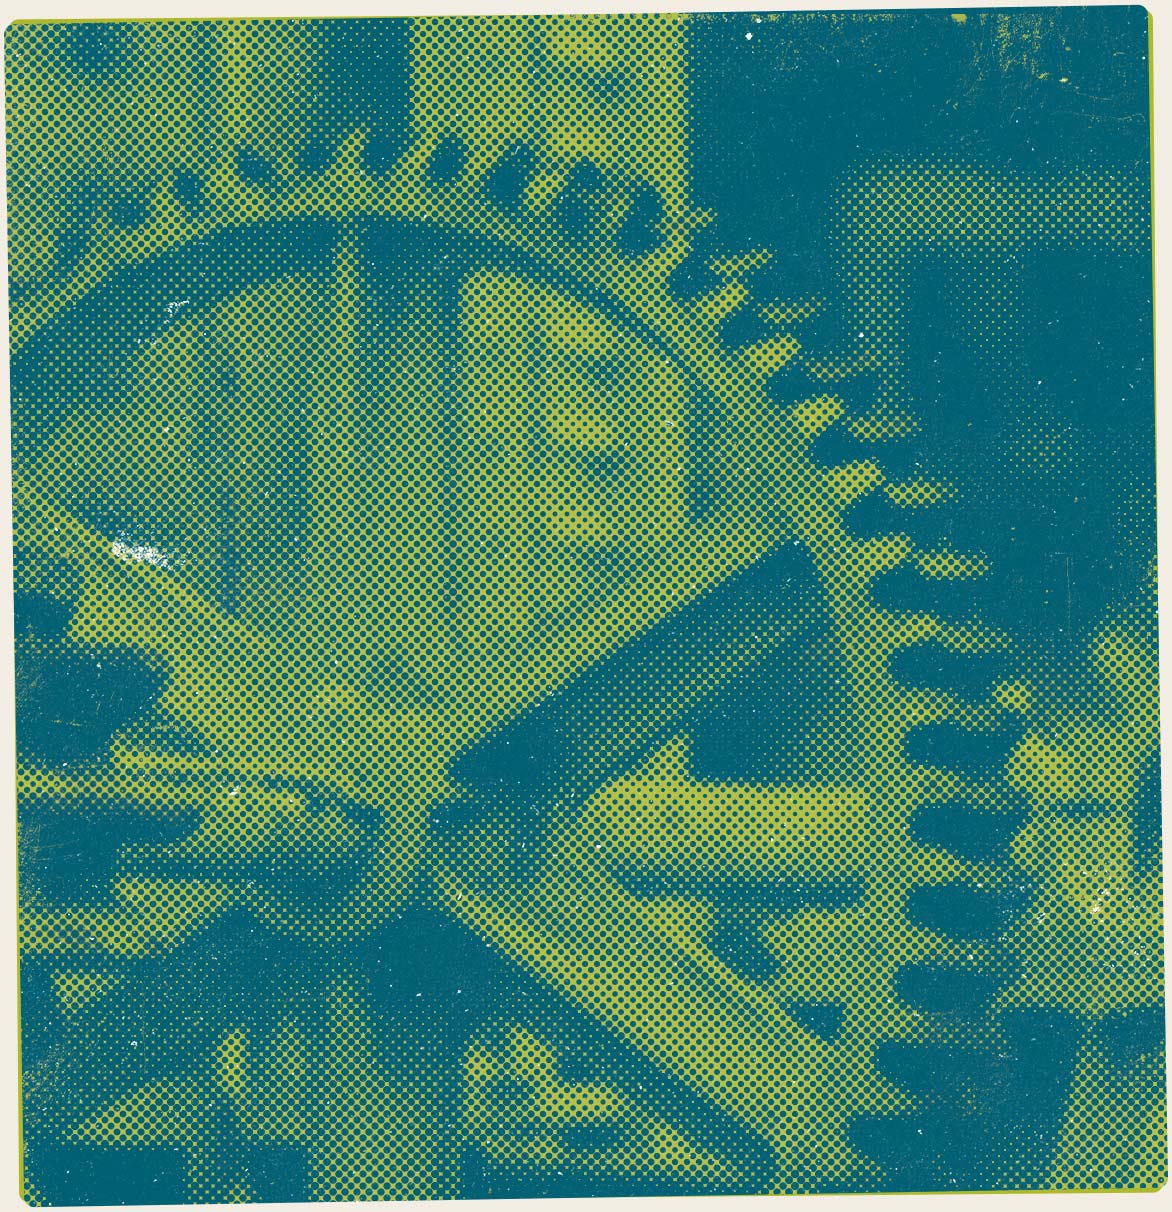 Green and blue halftone gears